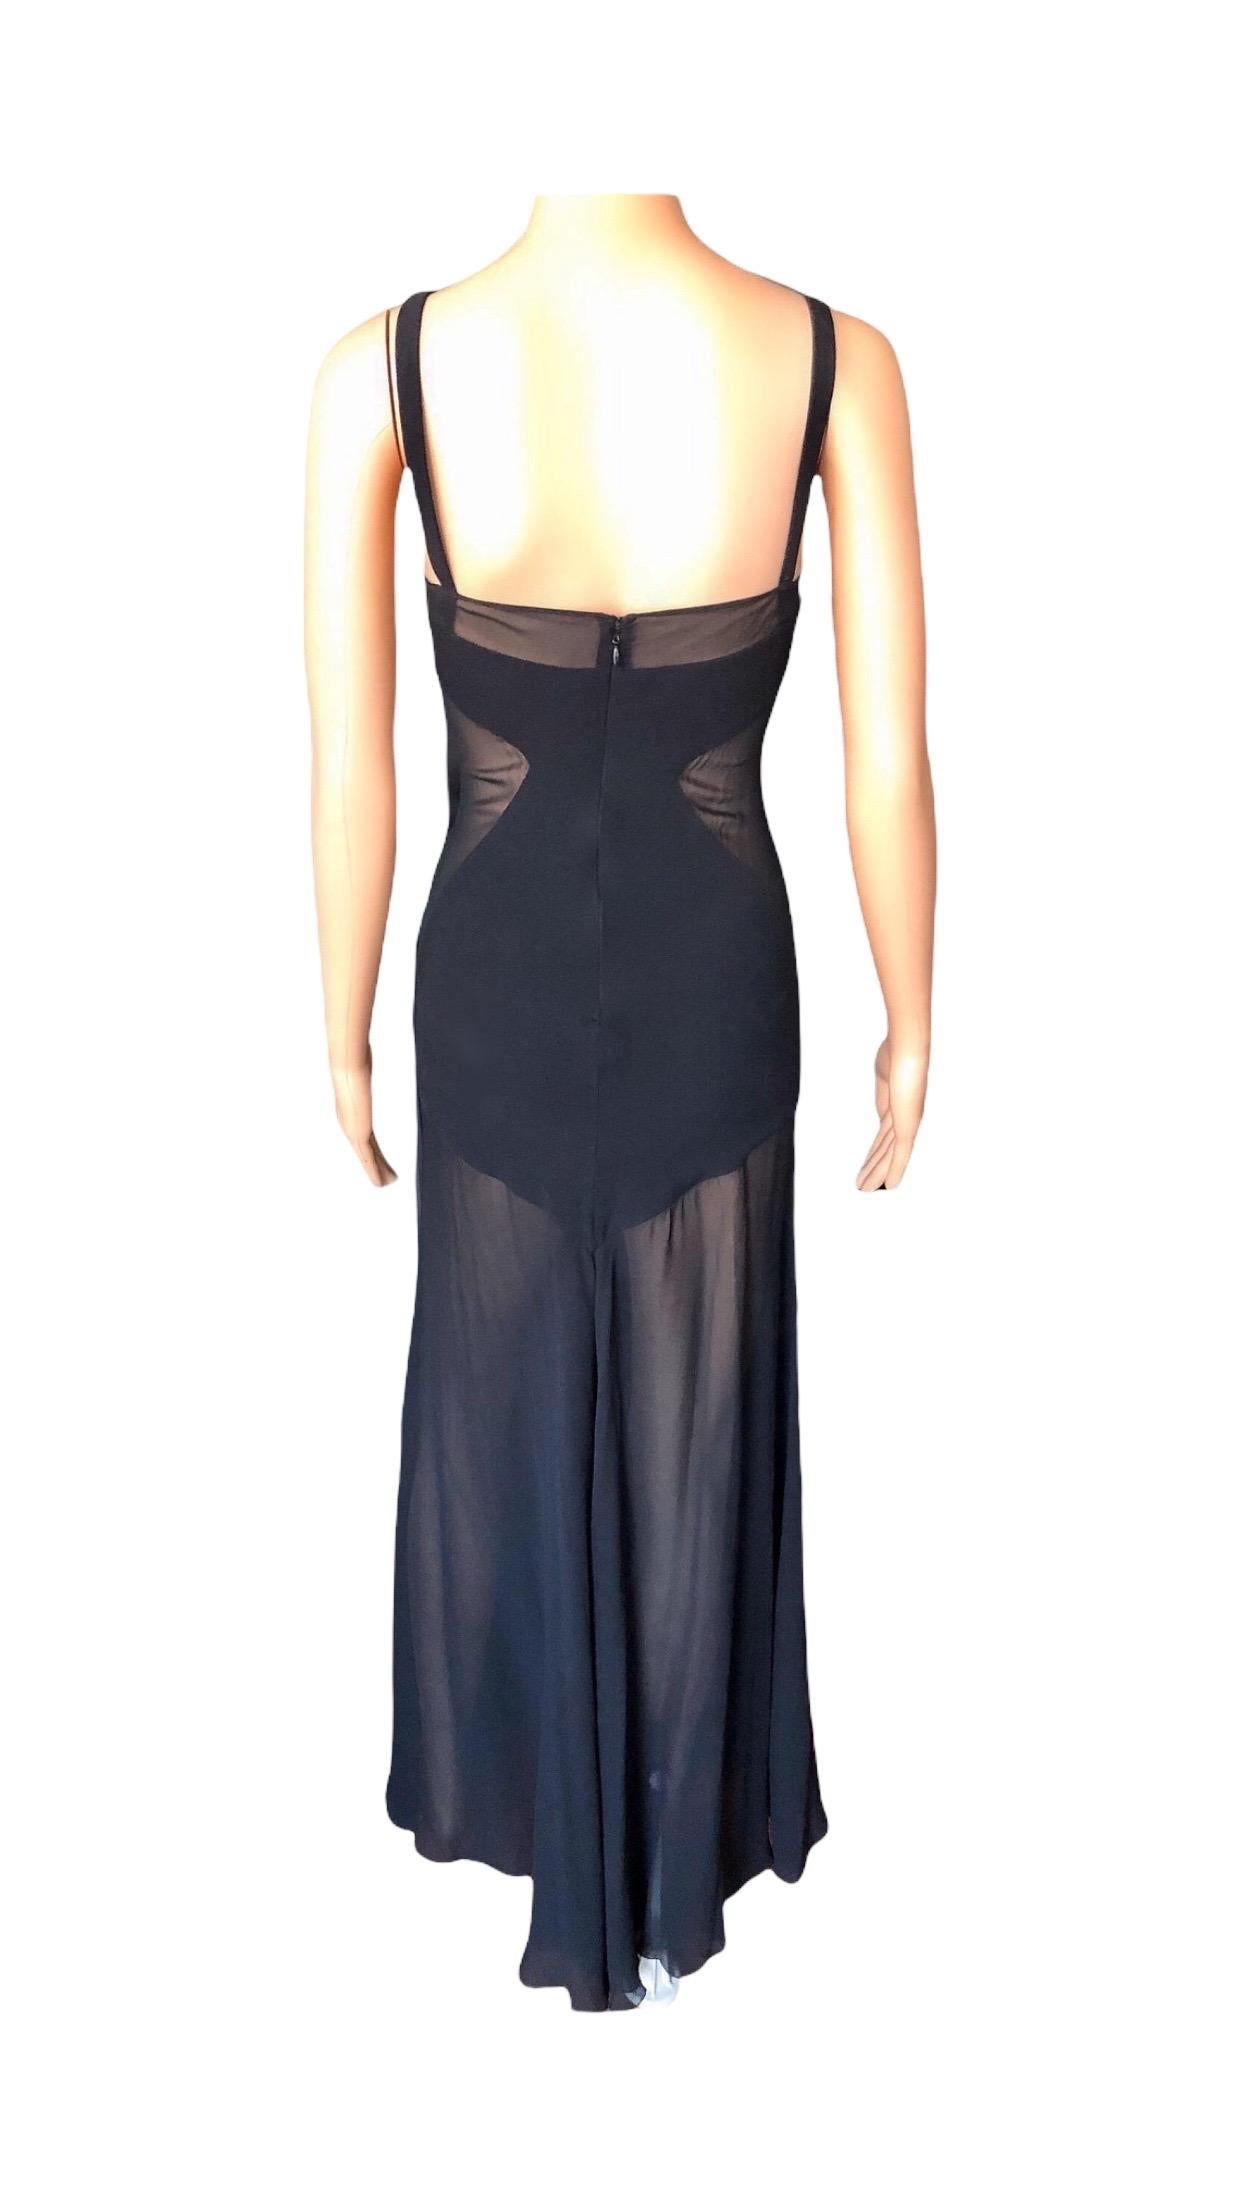 Gianni Versace S/S 1995 Vintage Sheer Panels Silk Black Gown Evening Dress For Sale 7